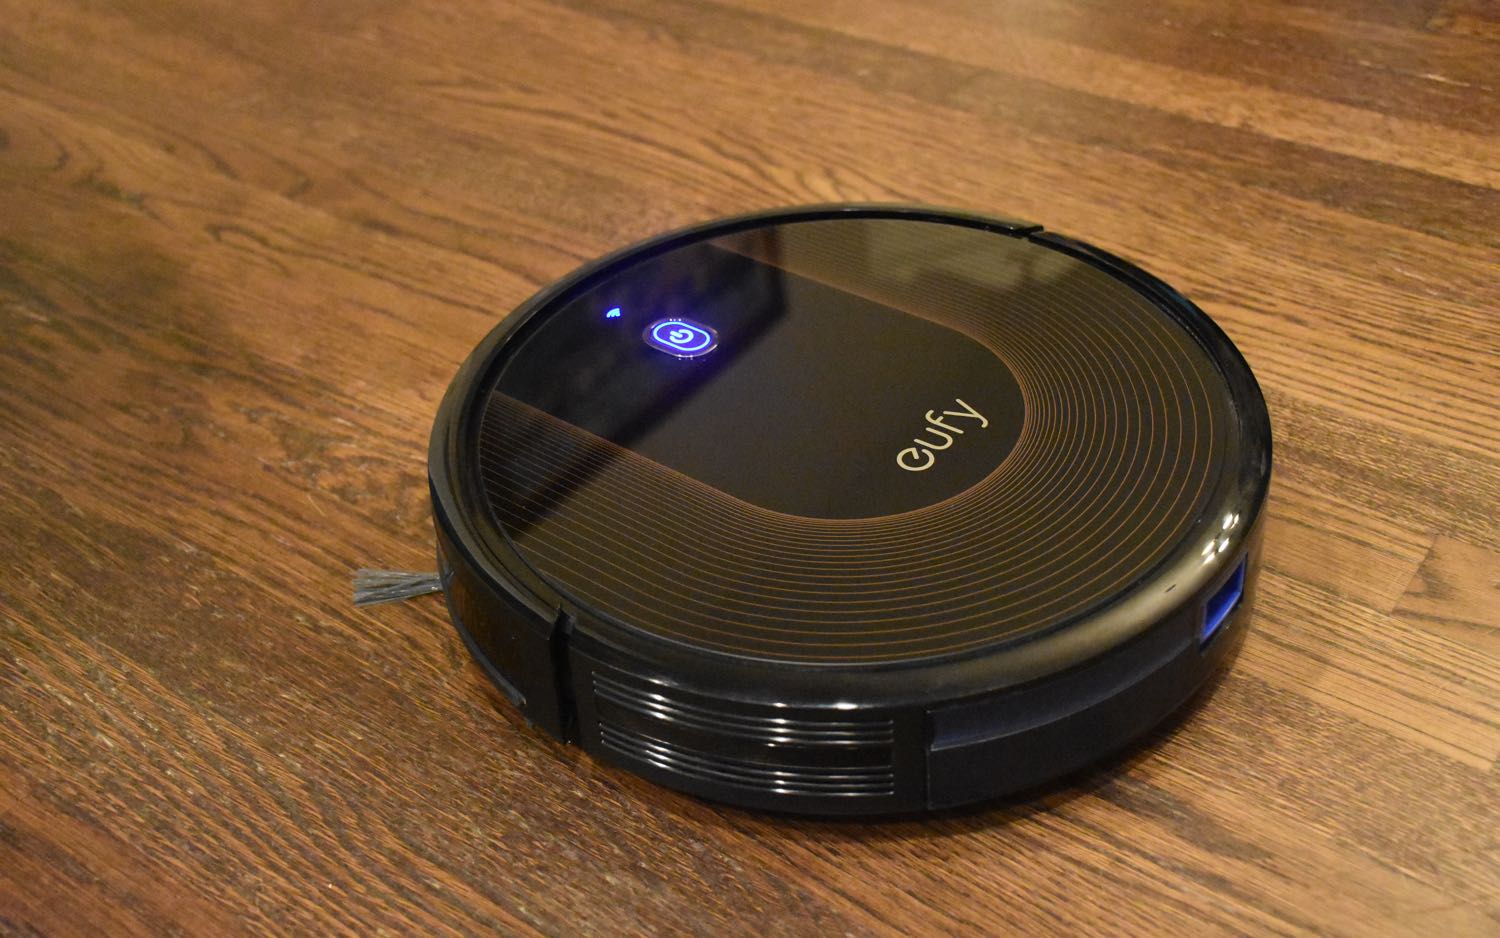 Eufy RoboVac 30C - Full Review and Benchmarks | Tom's Guide